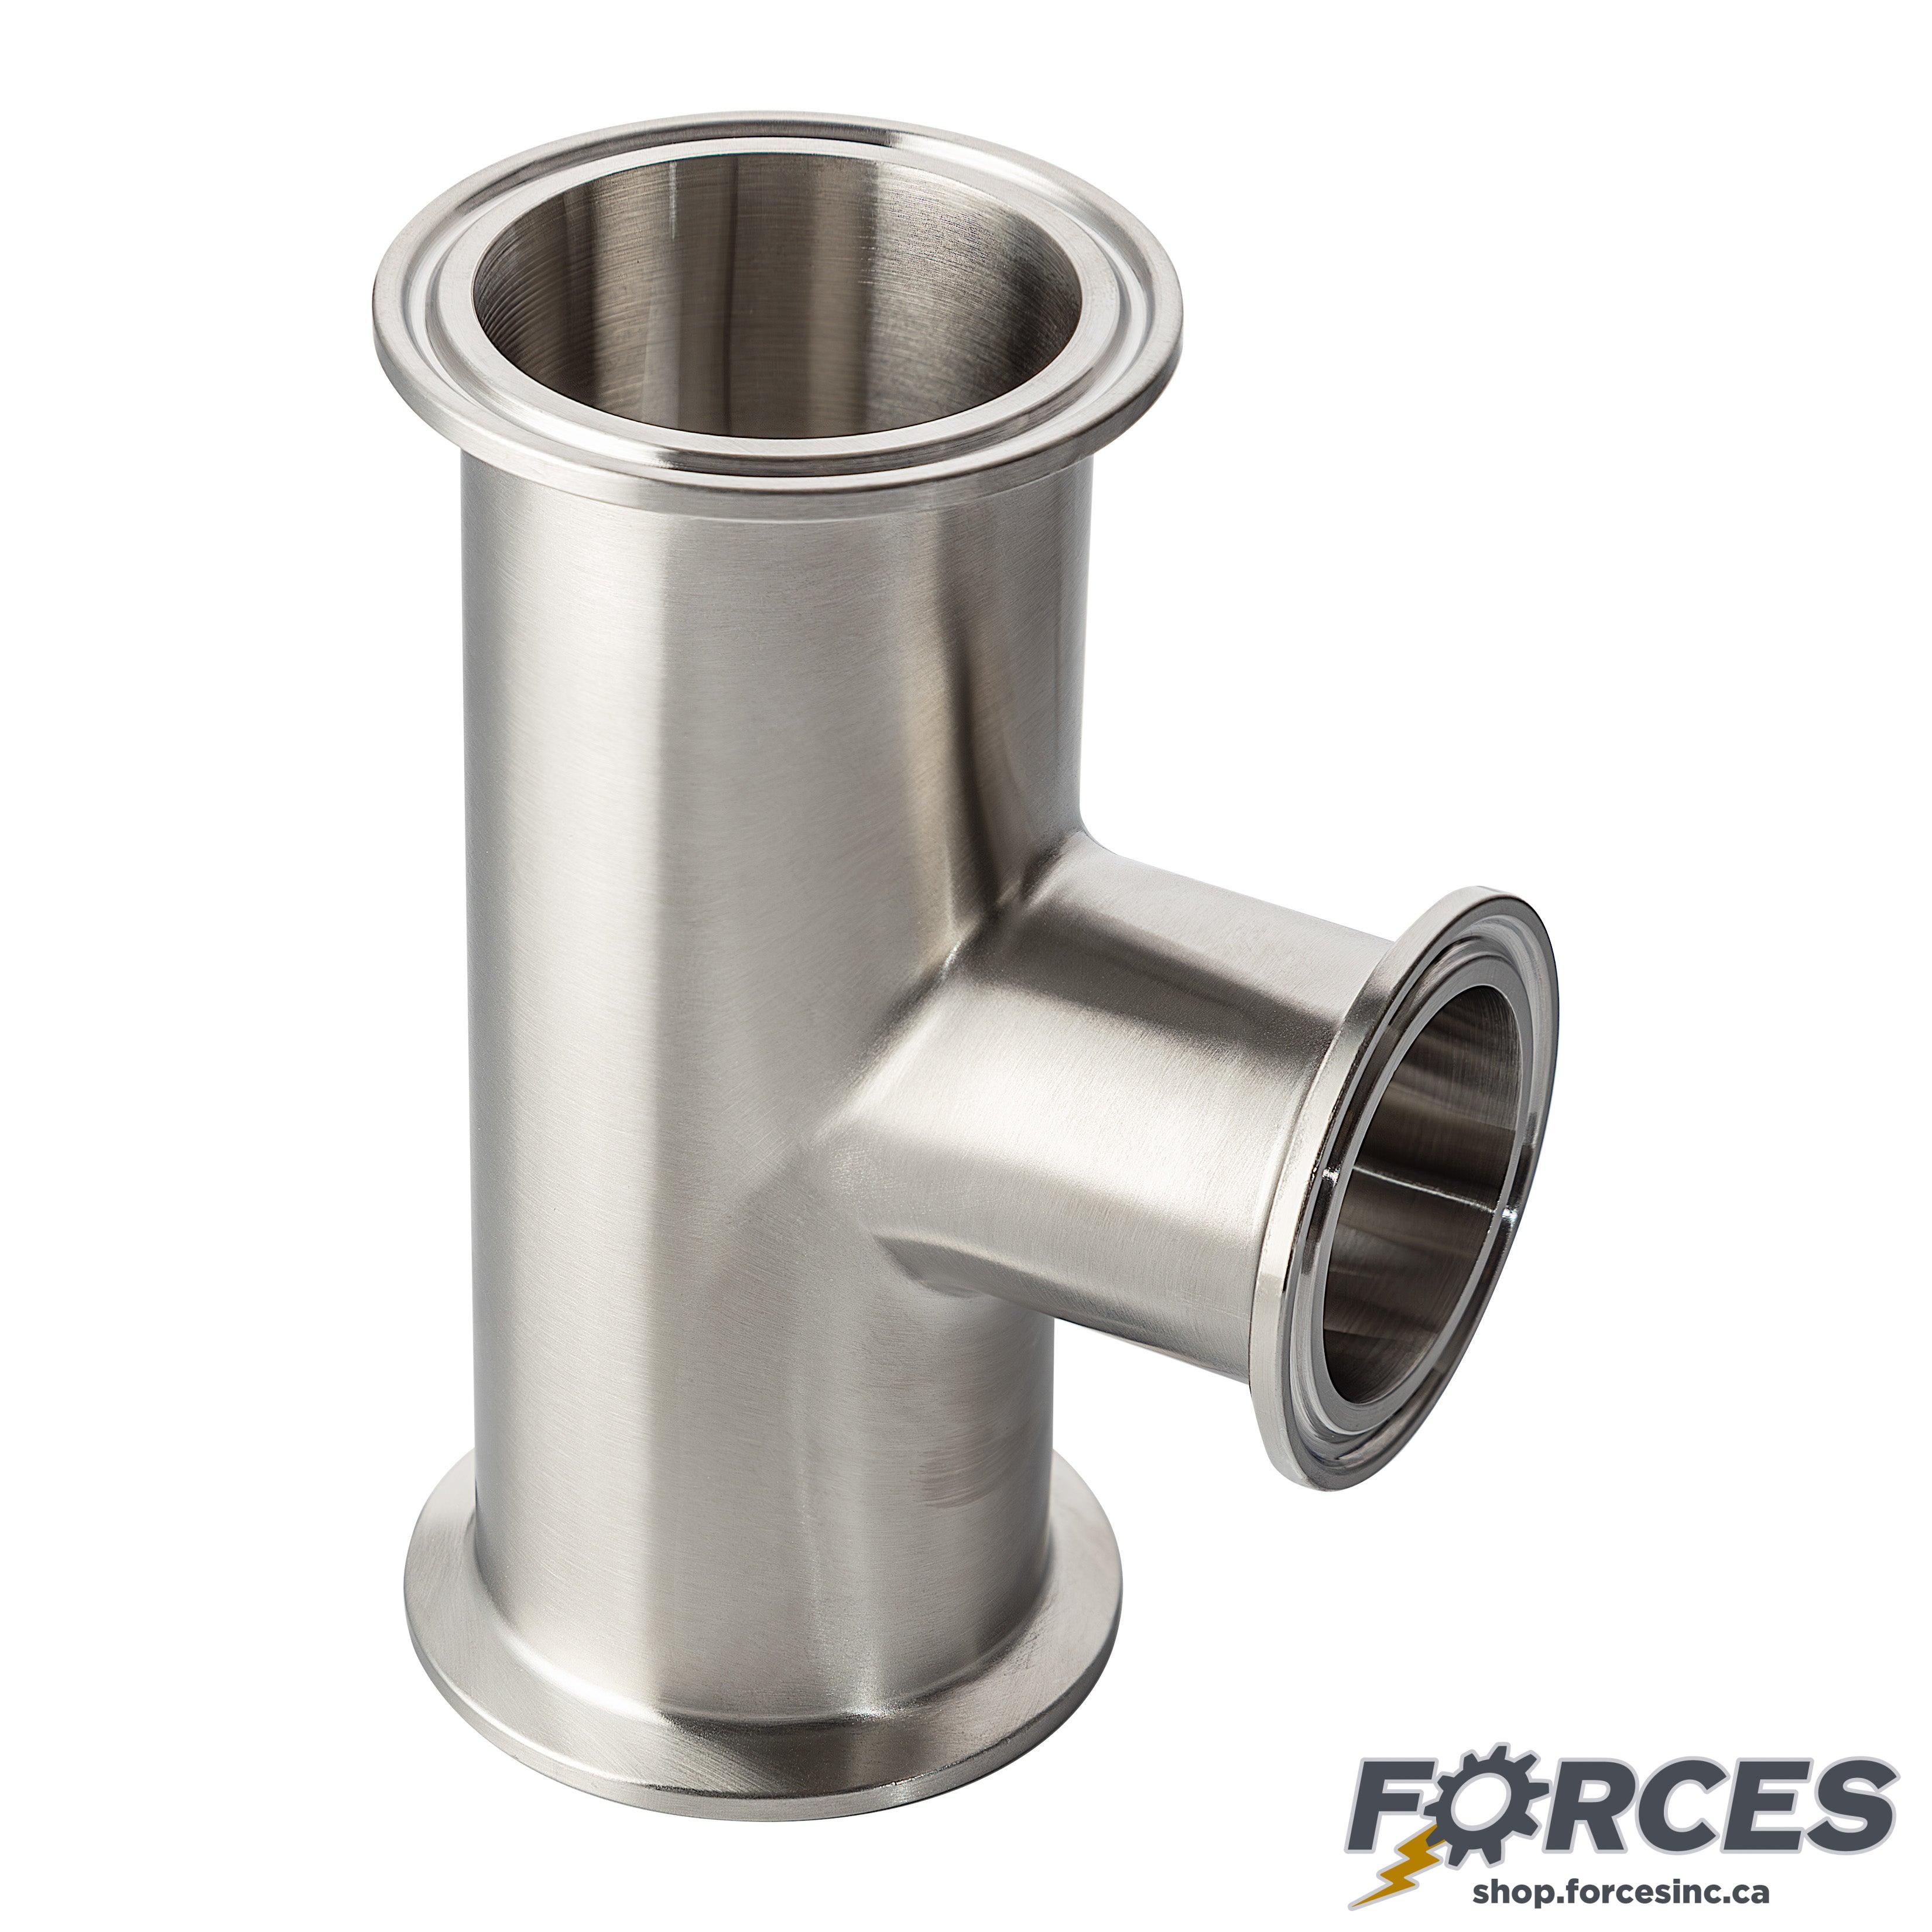 2" x 1-1/2" Tri-Clamp Tee Reducer - Stainless Steel 304 - Forces Inc